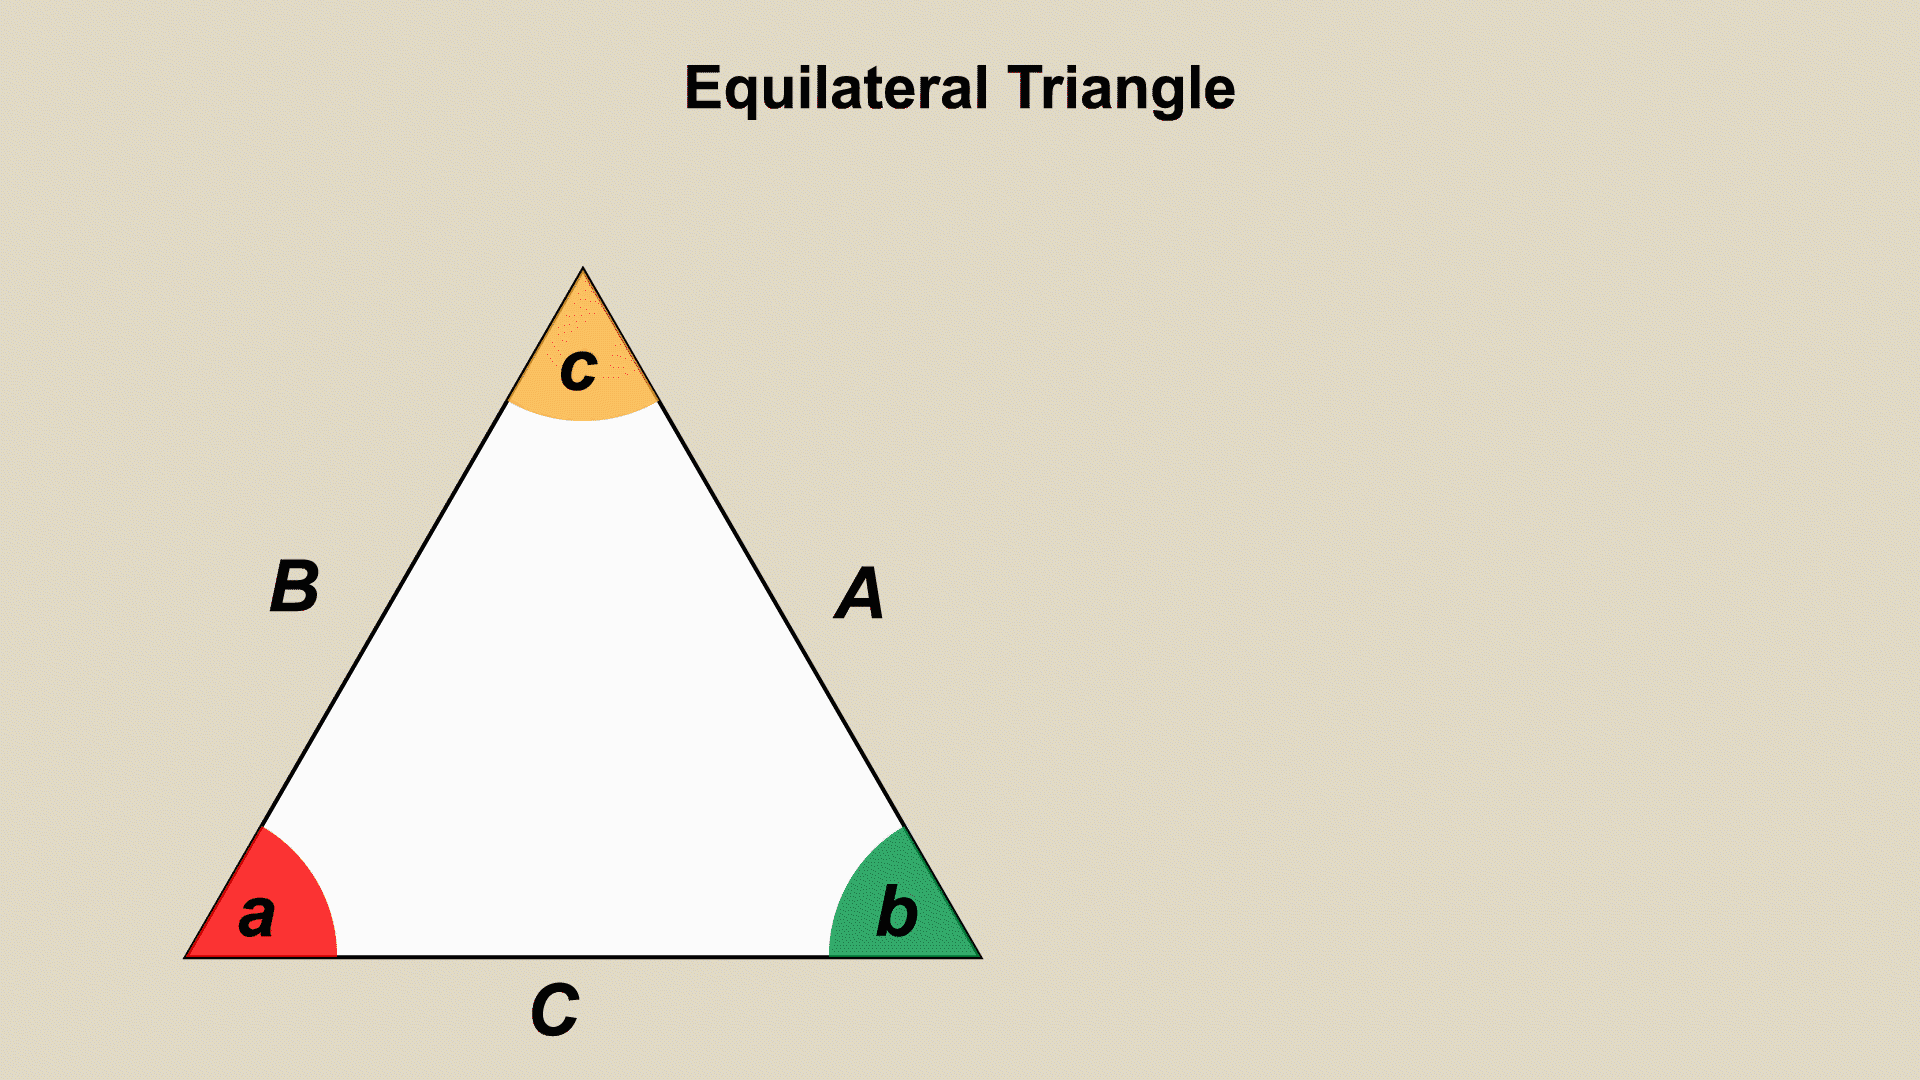 How to Classify Scalene, Isosceles & Equilateral Triangles by Side Lengths  | Geometry | Study.com